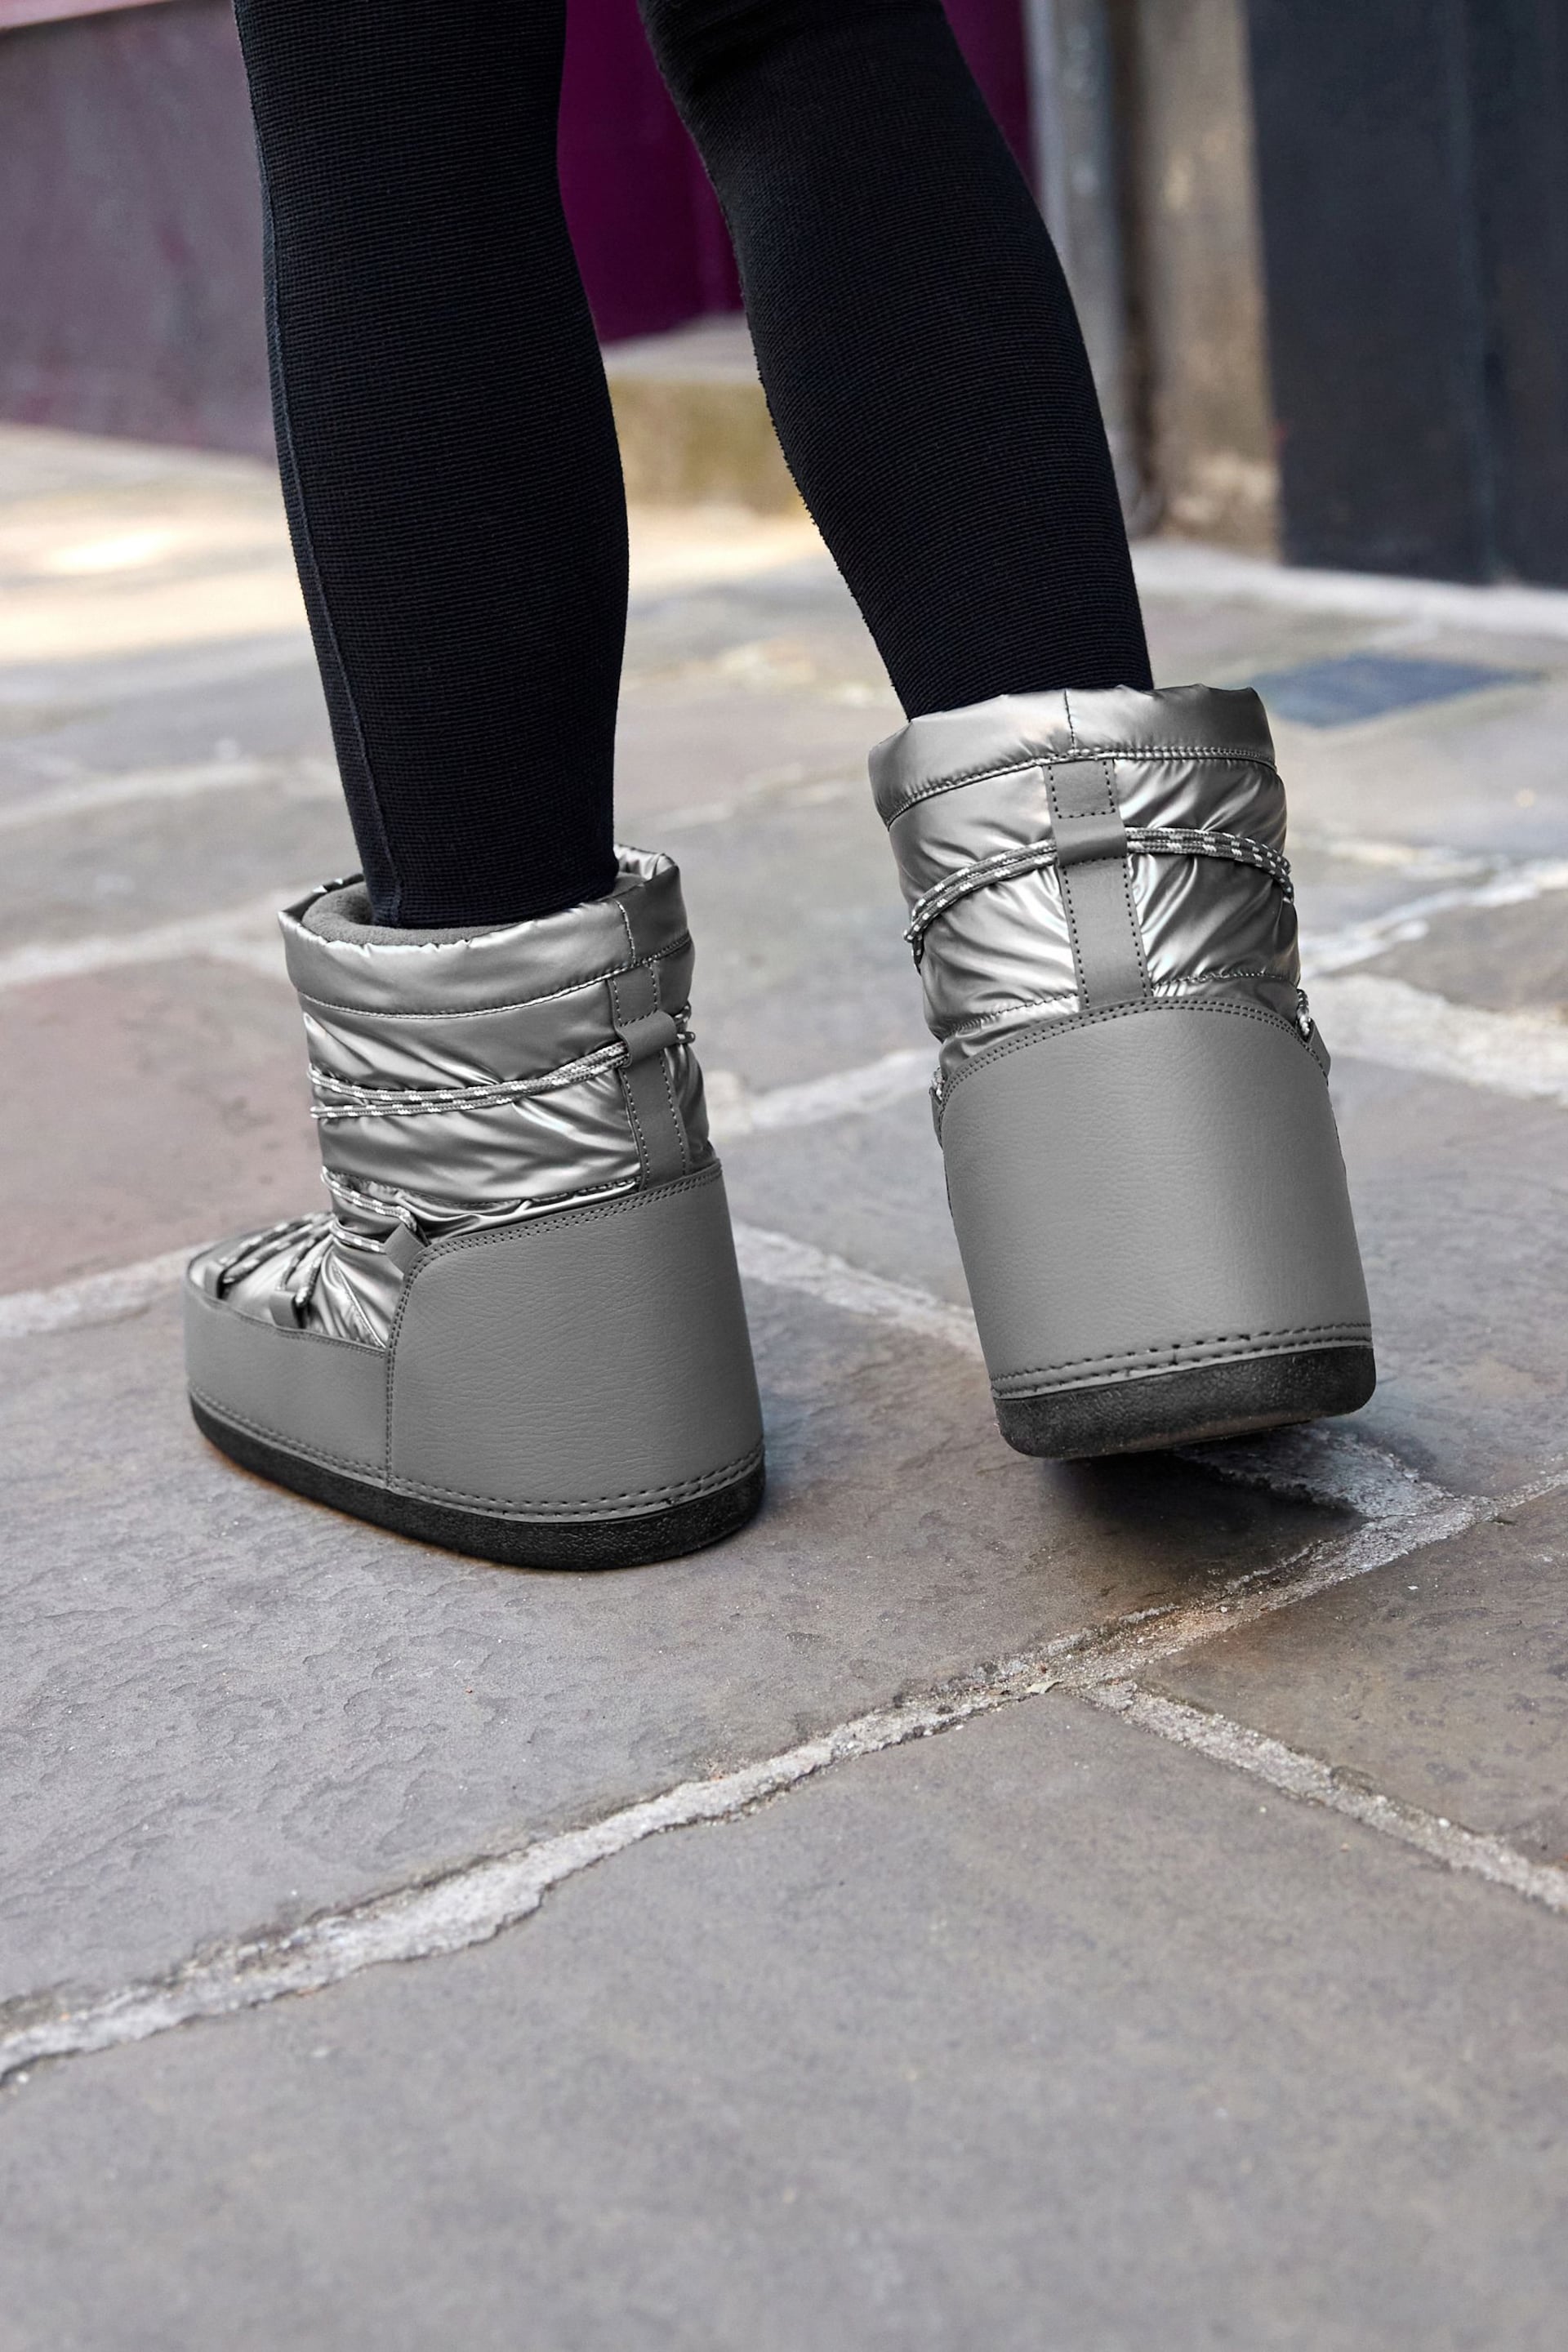 Silver Fashion Padded Boots - Image 4 of 10